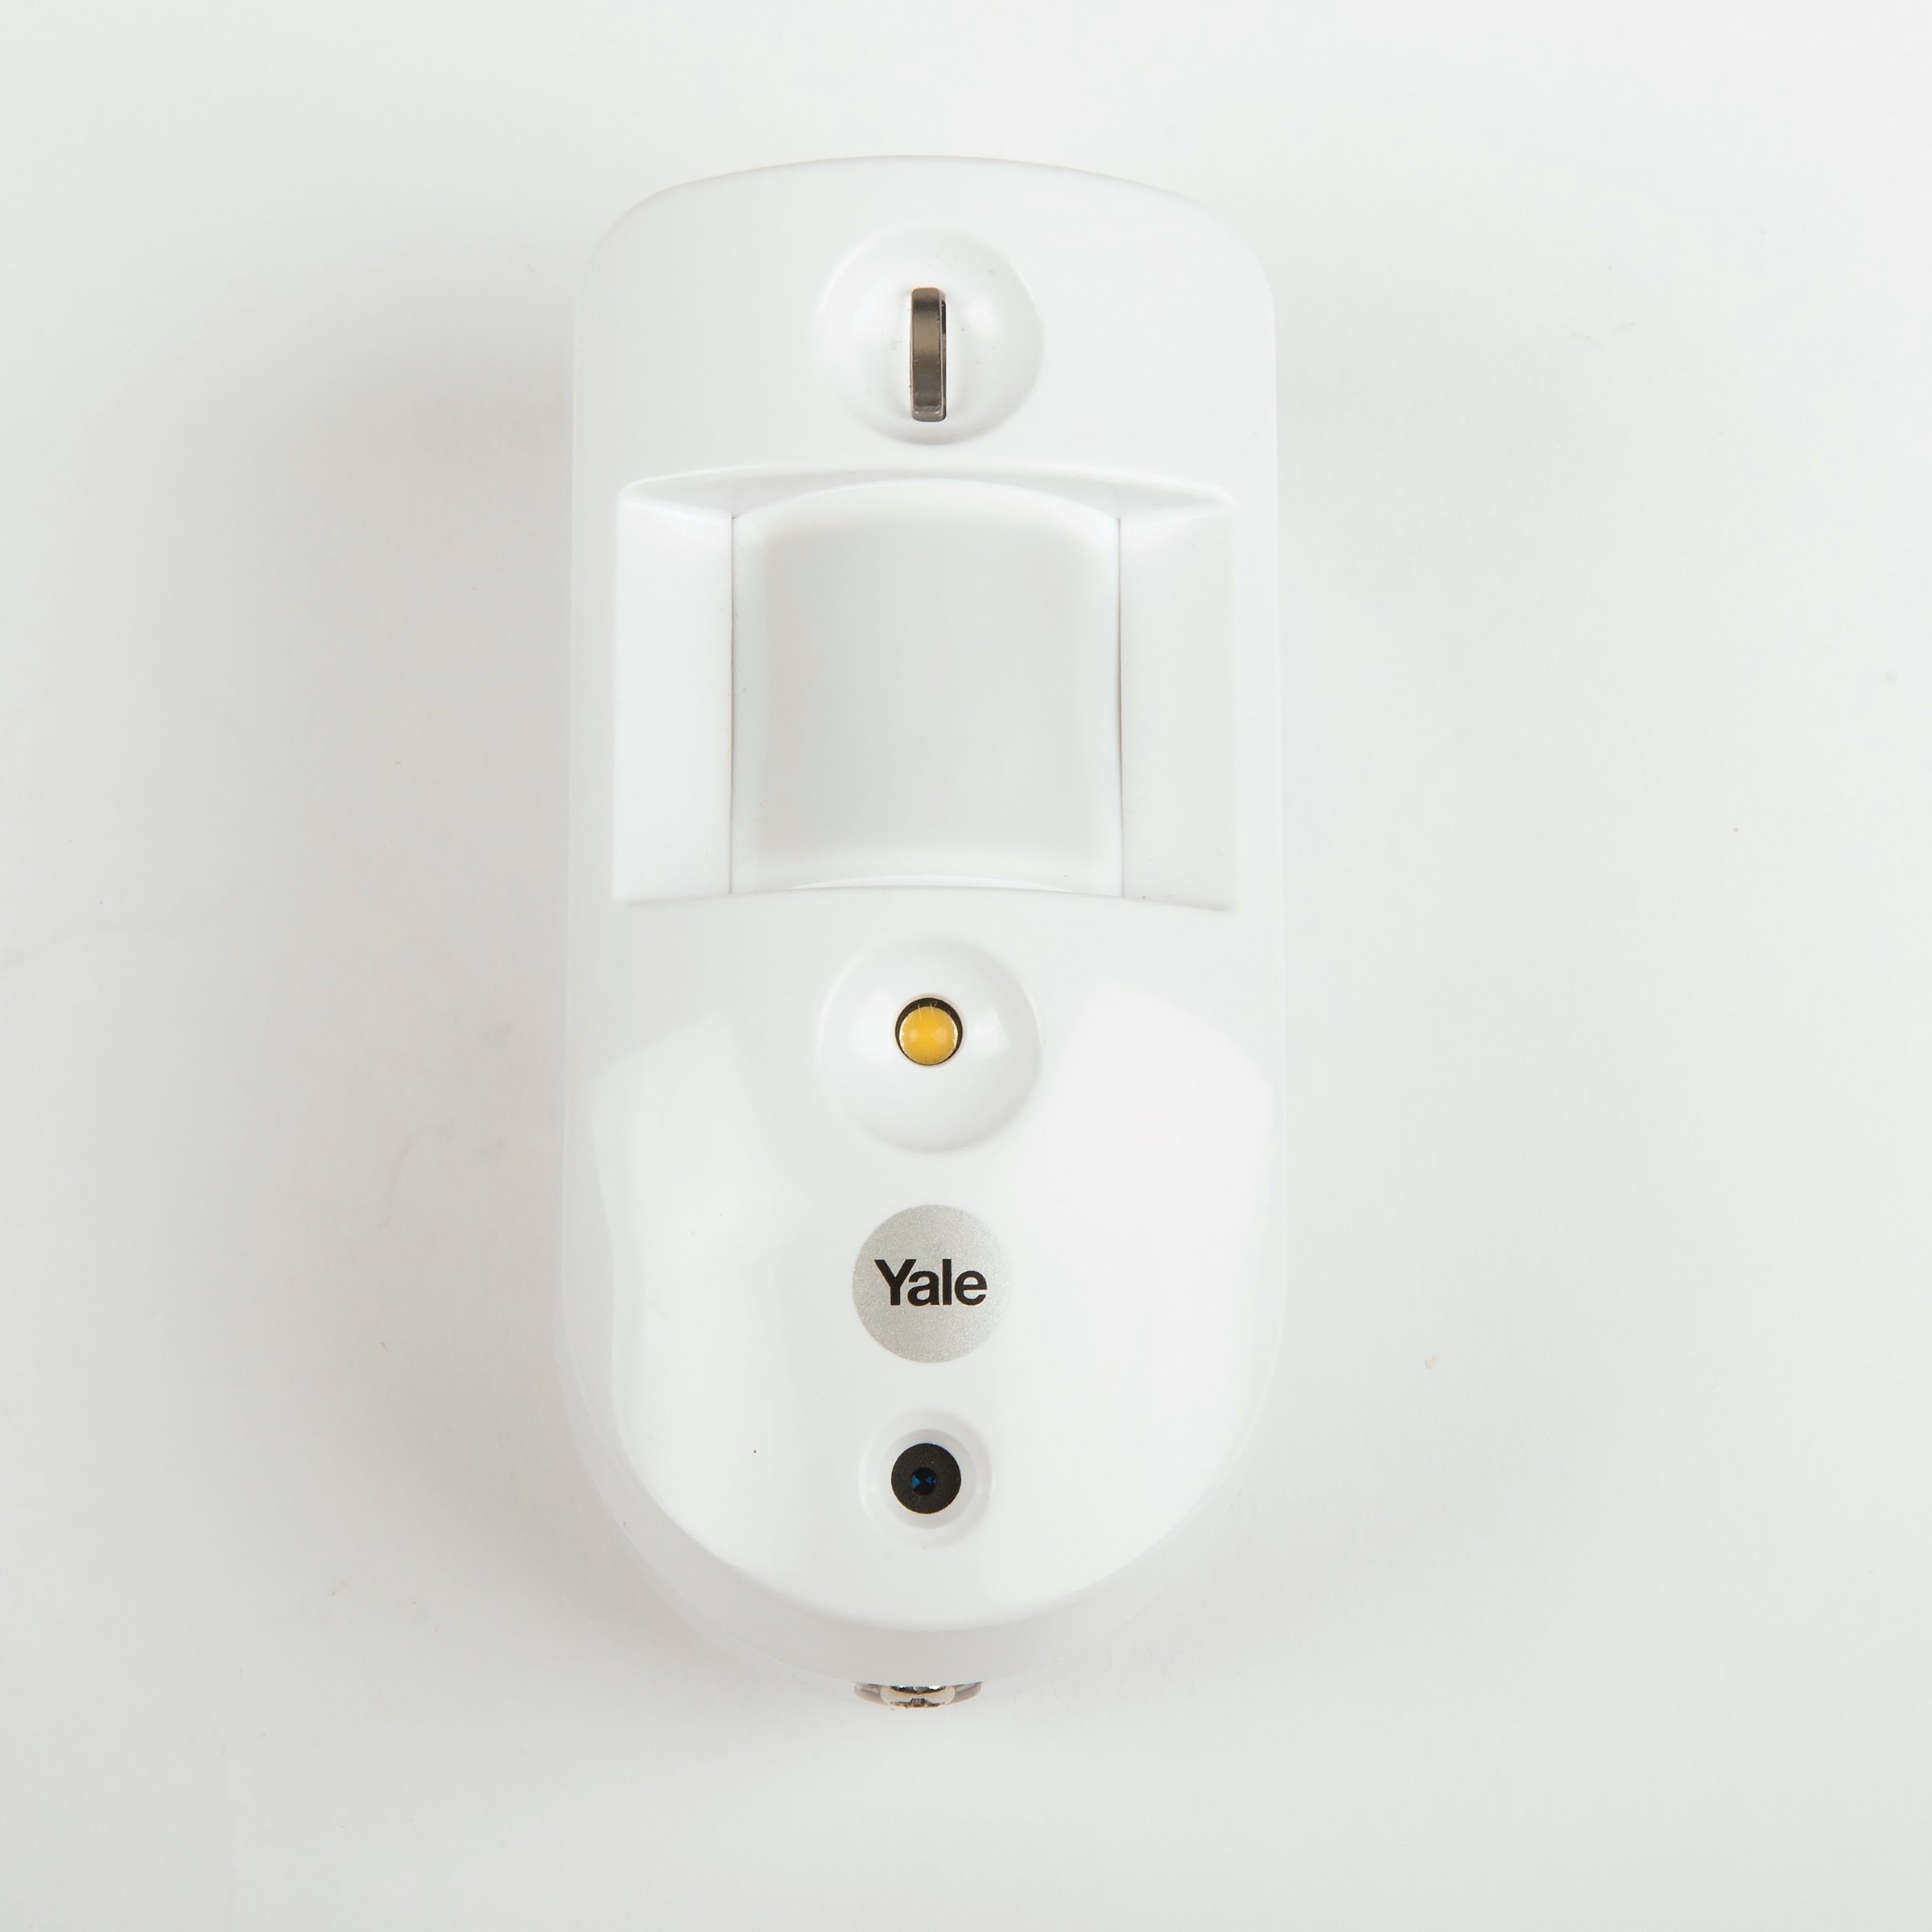 SR and EF Series - 868Mhz Yale EF-PIR for Yale Smart Alarms 